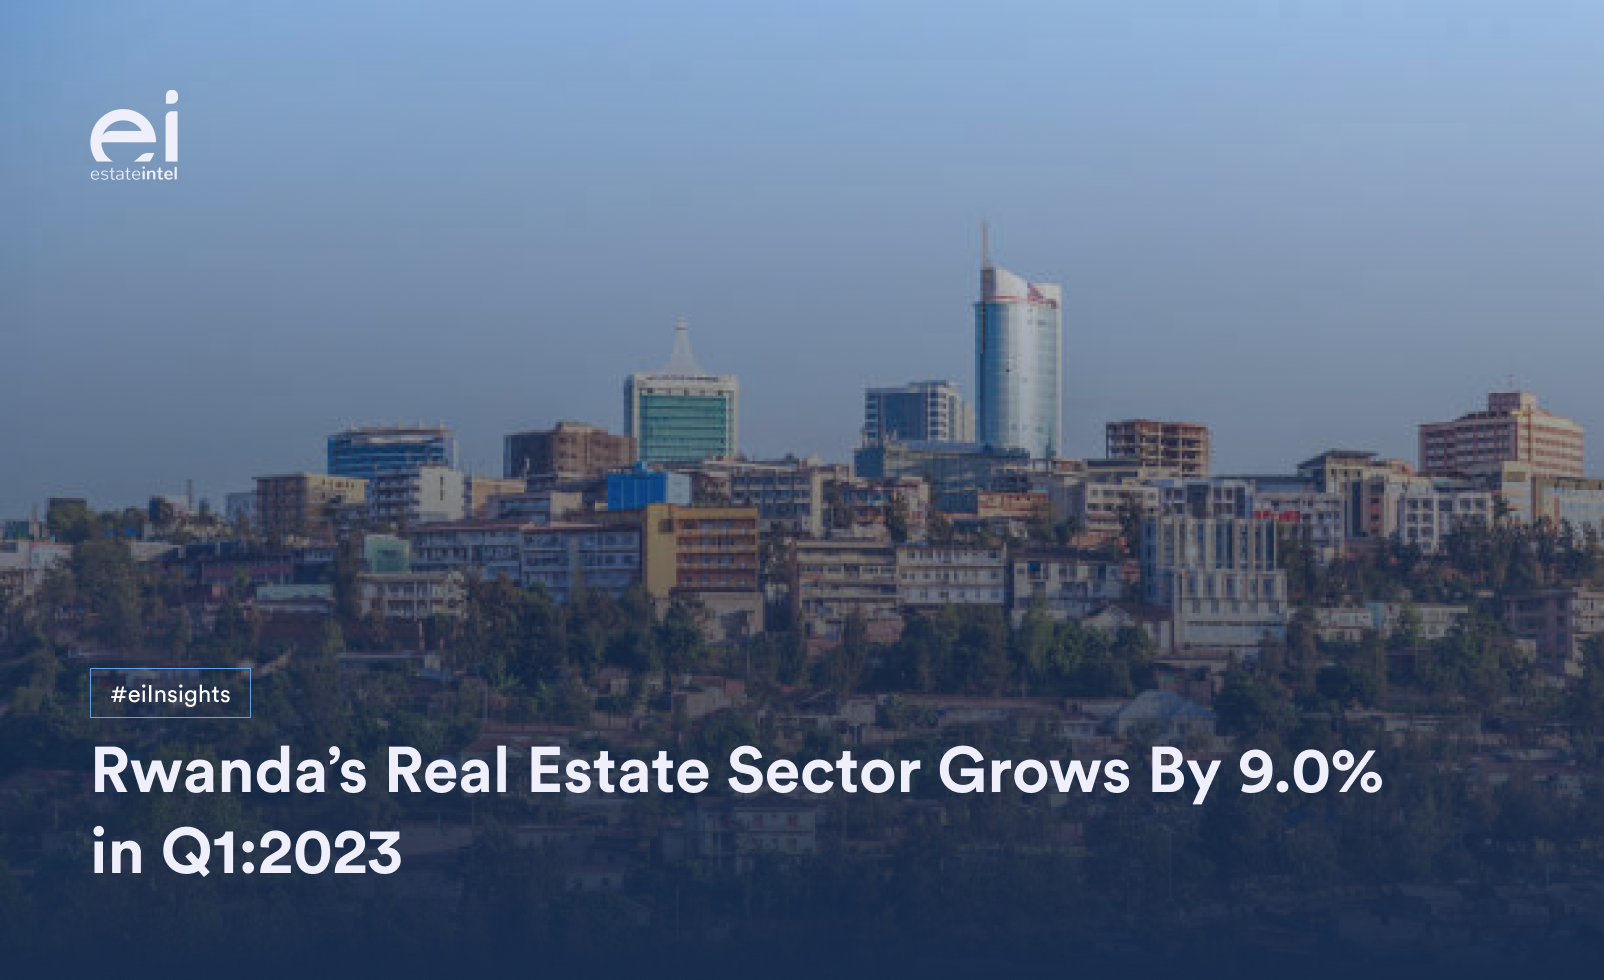 Rwanda’s GDP and Real Estate Sector Grow By Over 9.0%, In Q1:2023